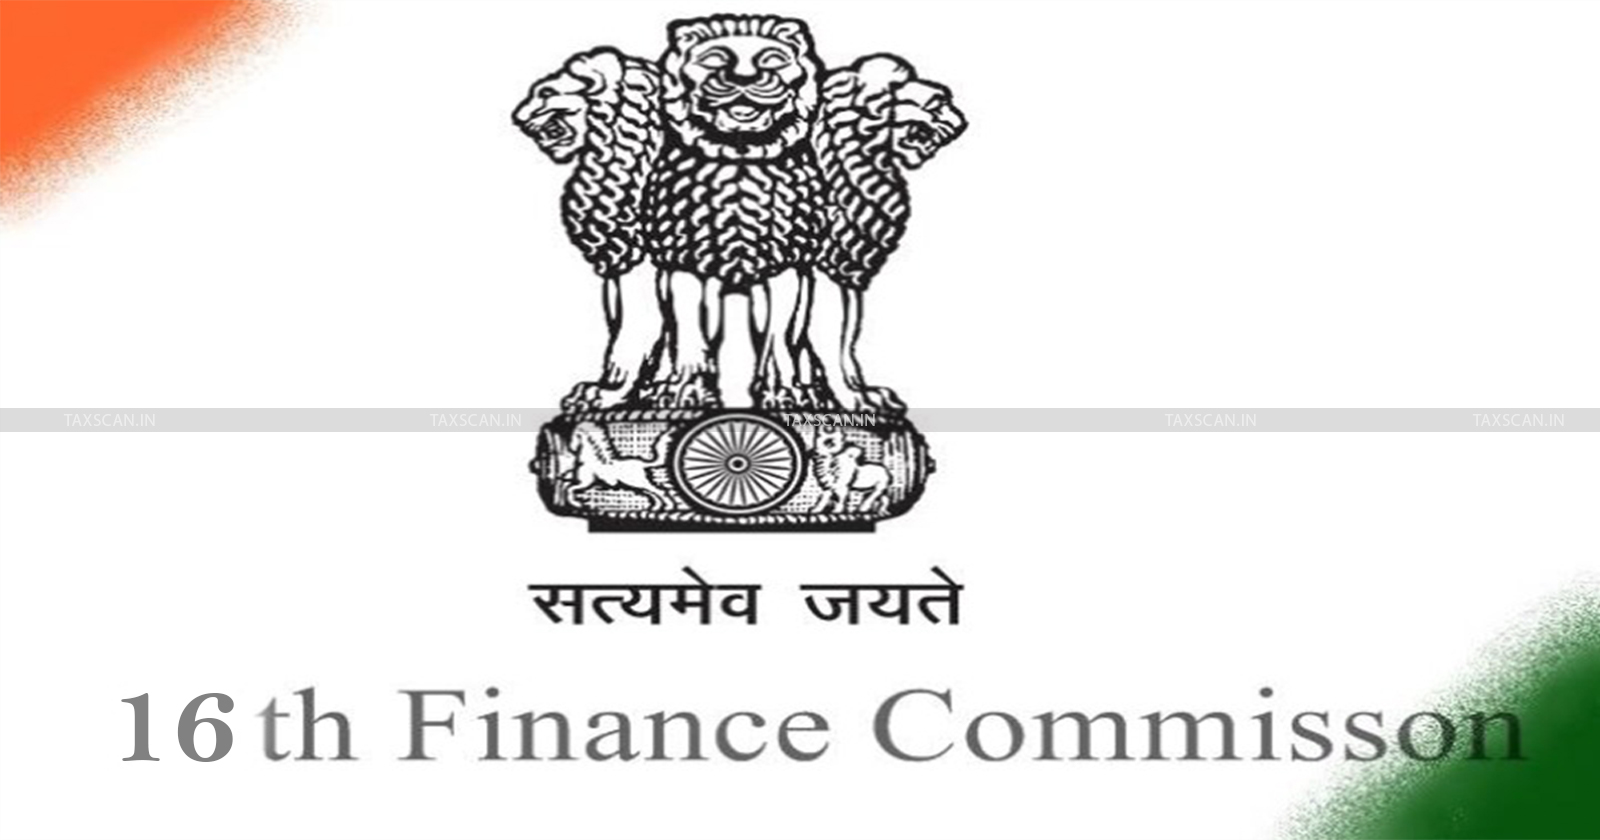 Cabinet - 16th Finance Commission - Finance Commission - taxscan